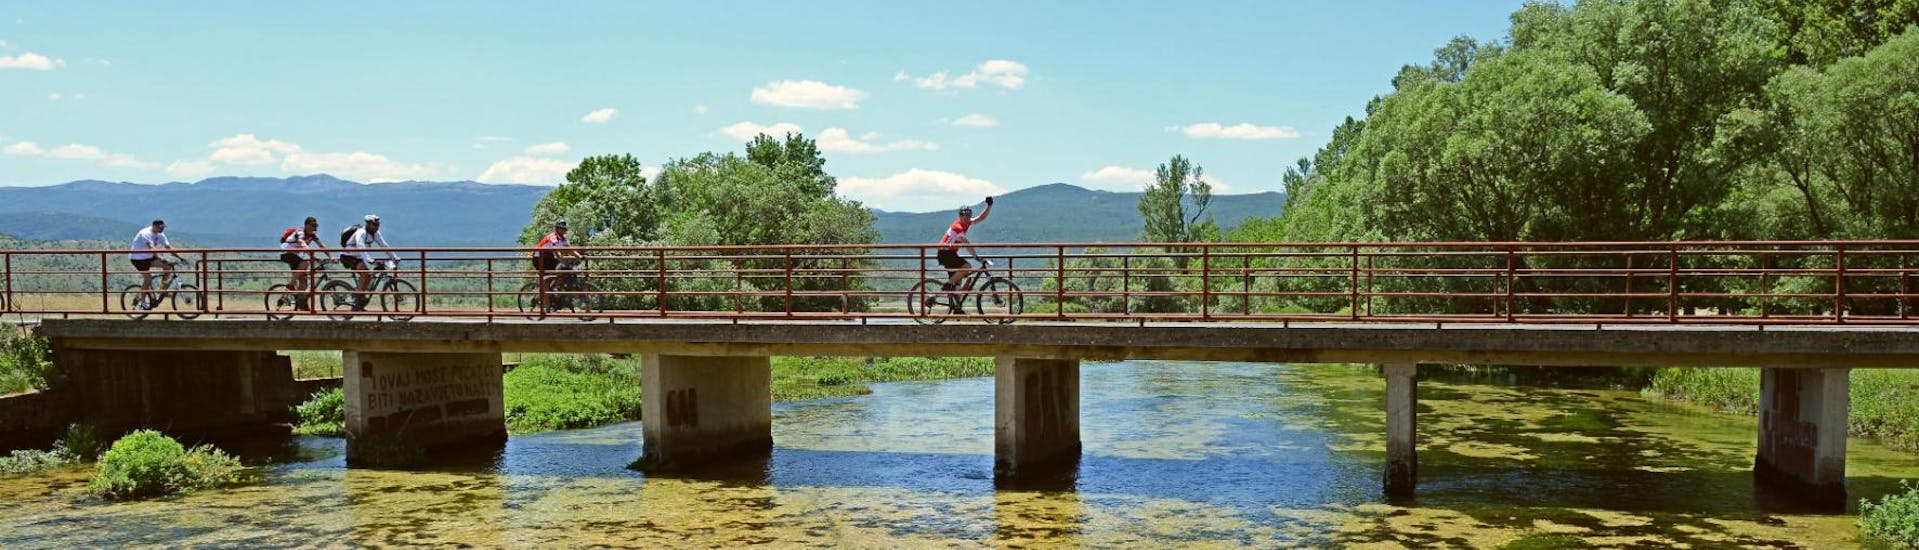 During the Cetina Spring Bike Tour from Sinj, cyclists are crossing a bridge led by a certified guide from Hotel Alkar.